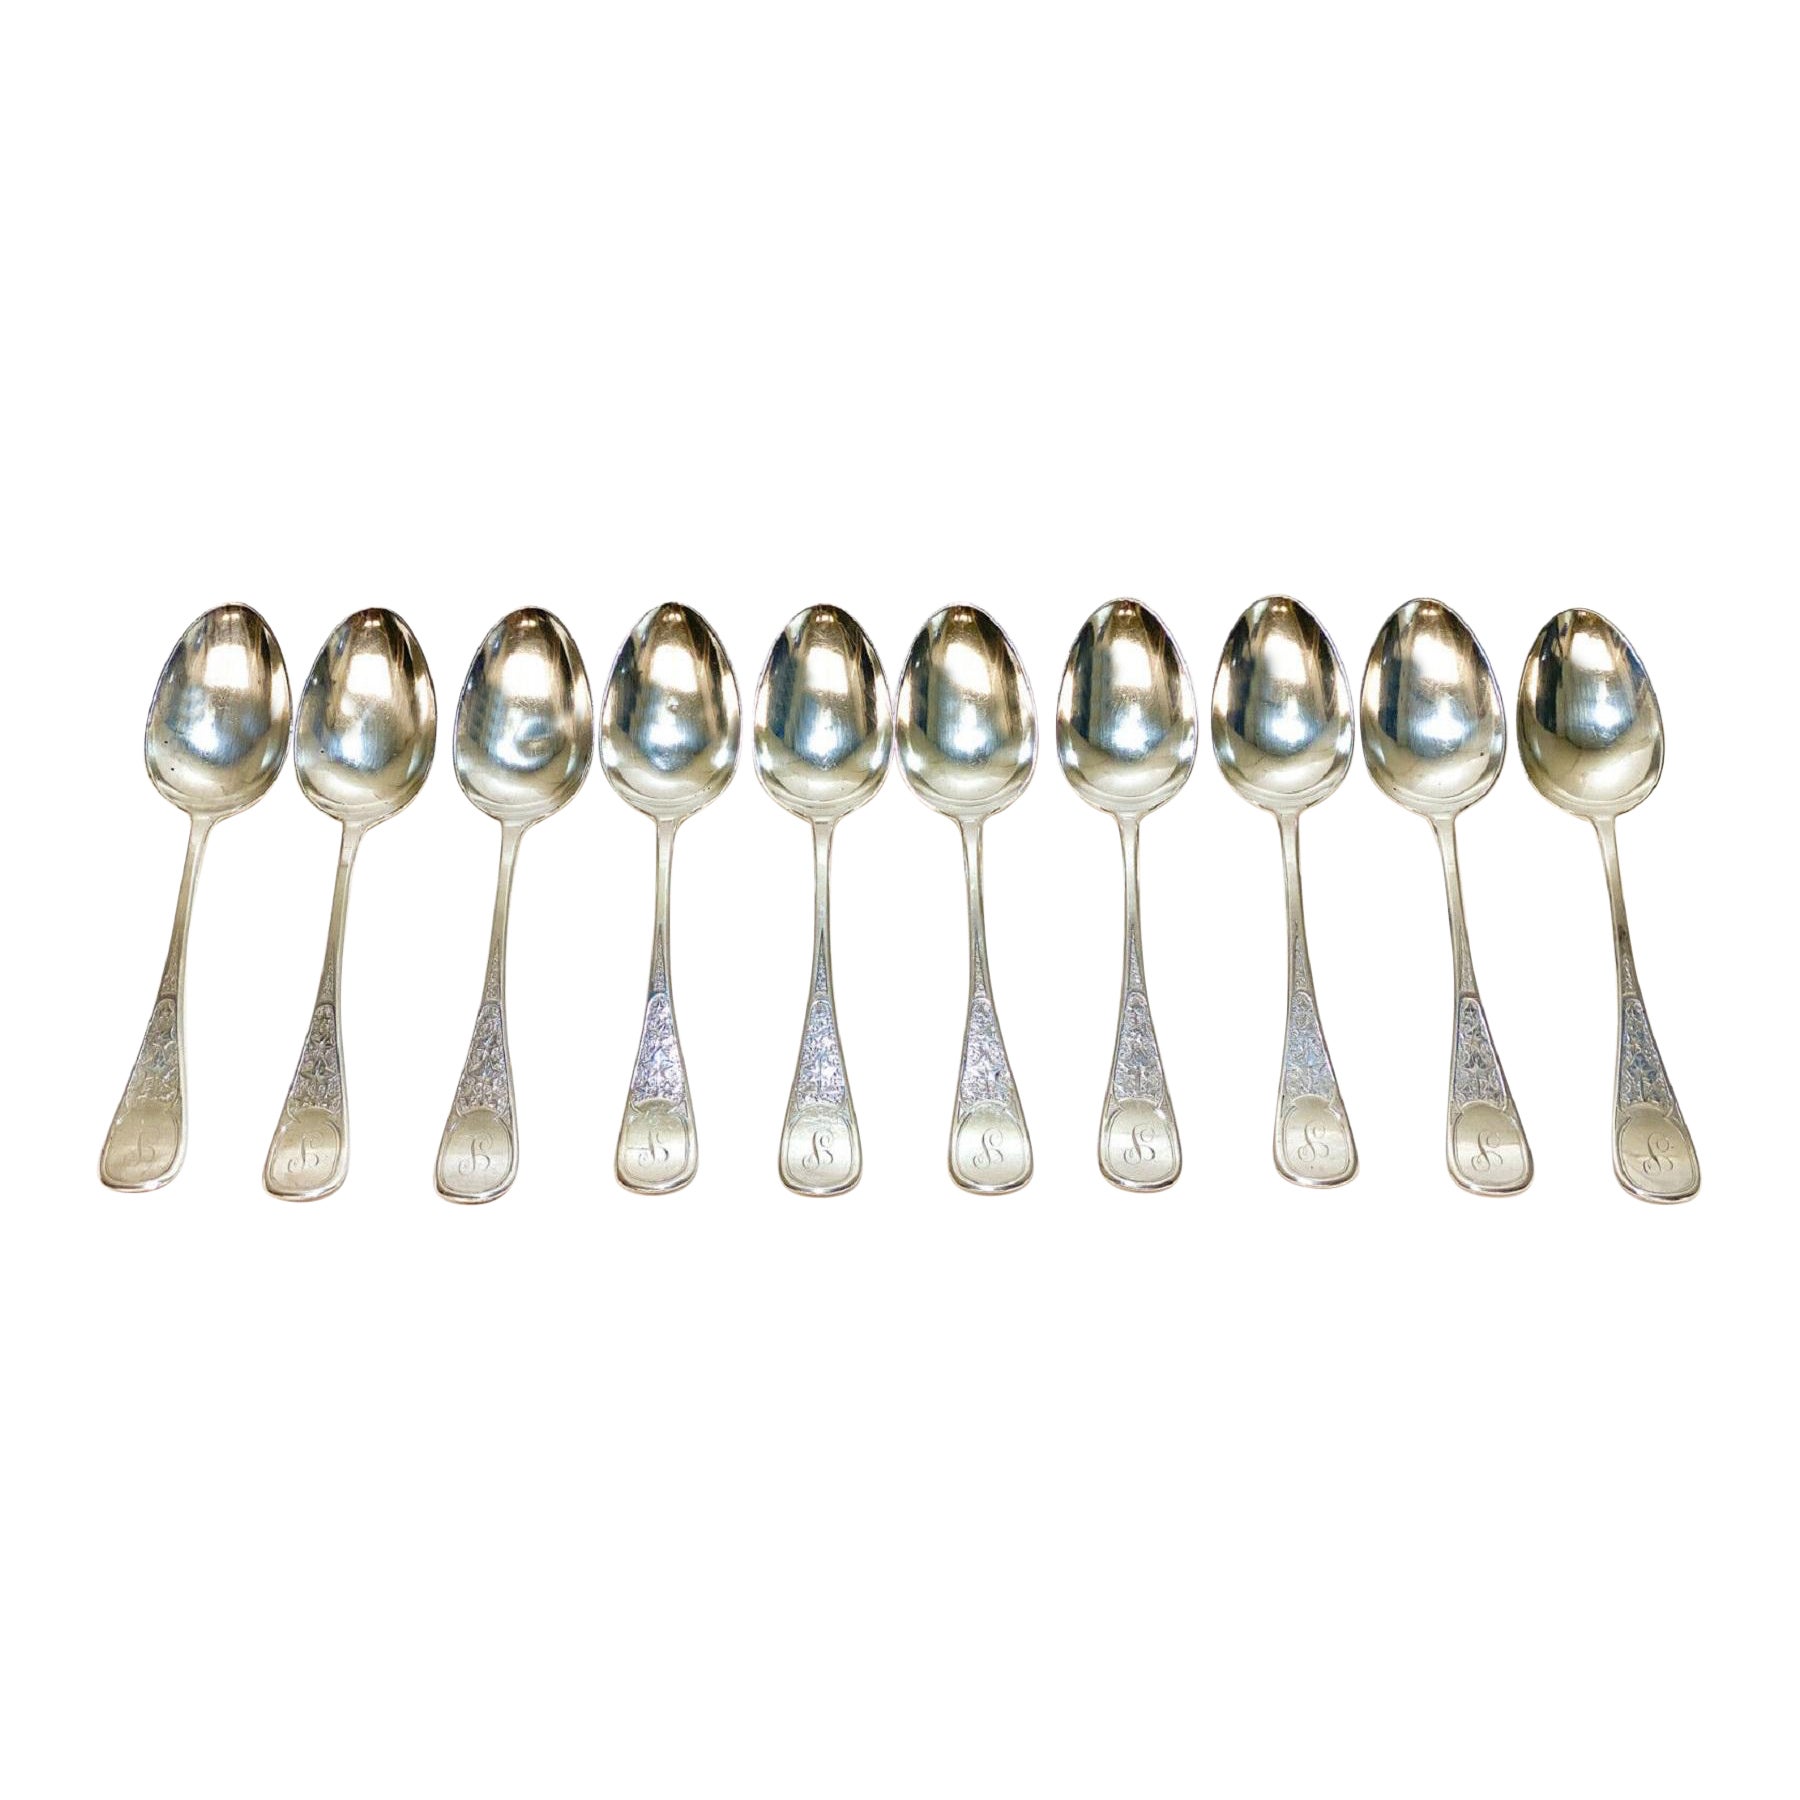 10 Tiffany & Co. Sterling Silver Tablespoons in Antique Ivy, Monogram "J" For Sale